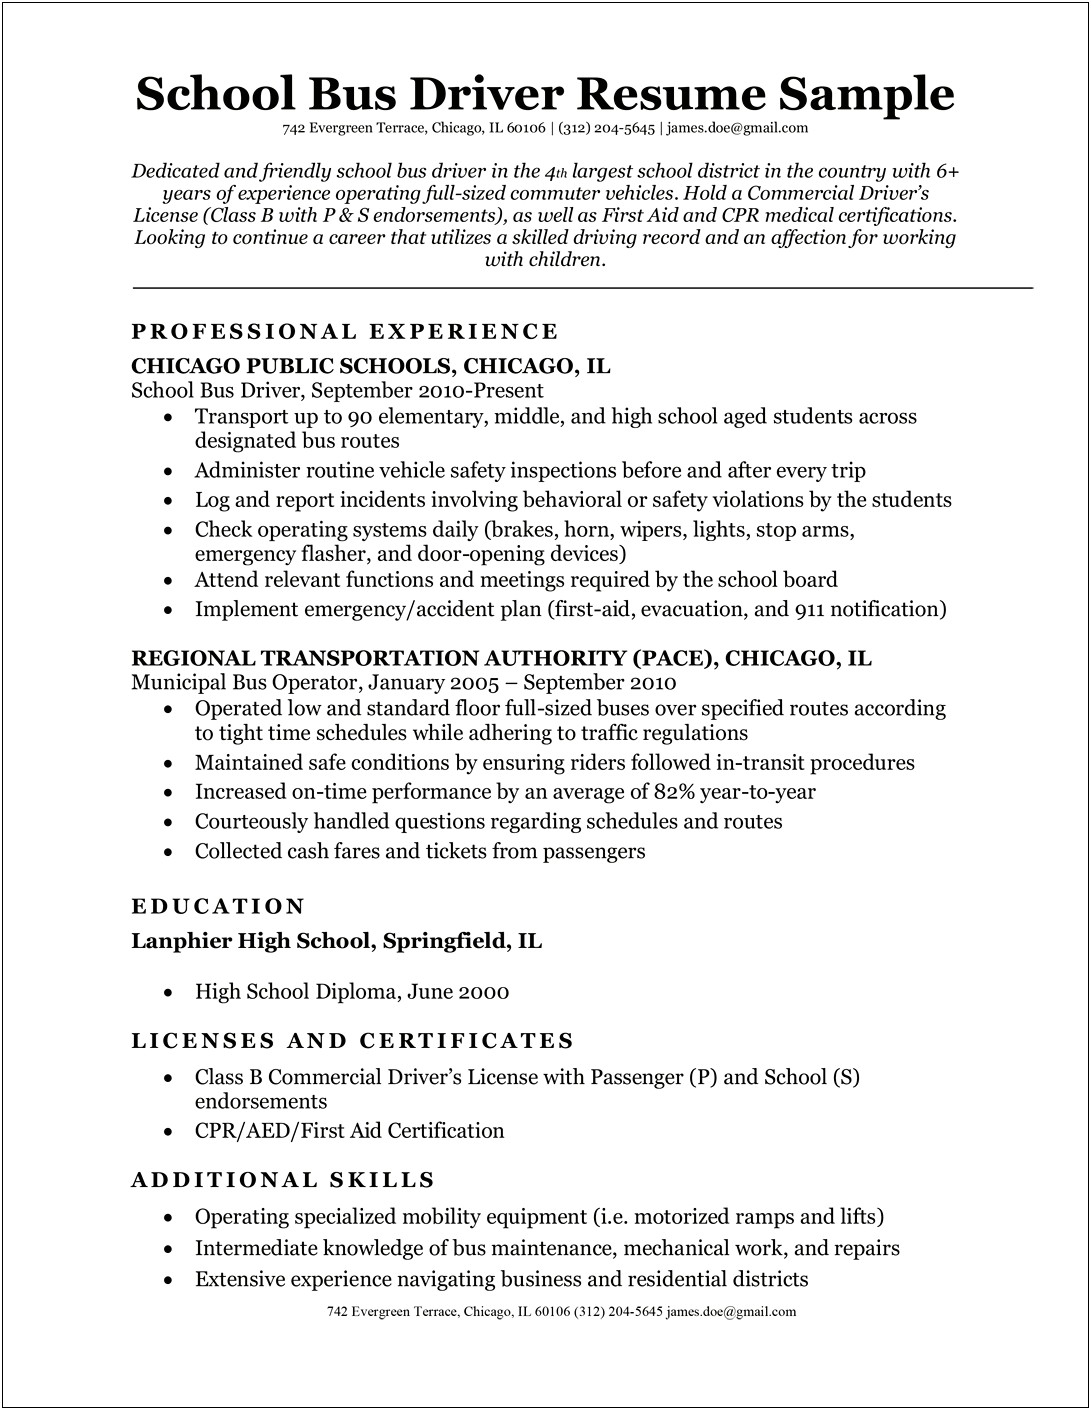 Resume Objective Examples For Working With Children